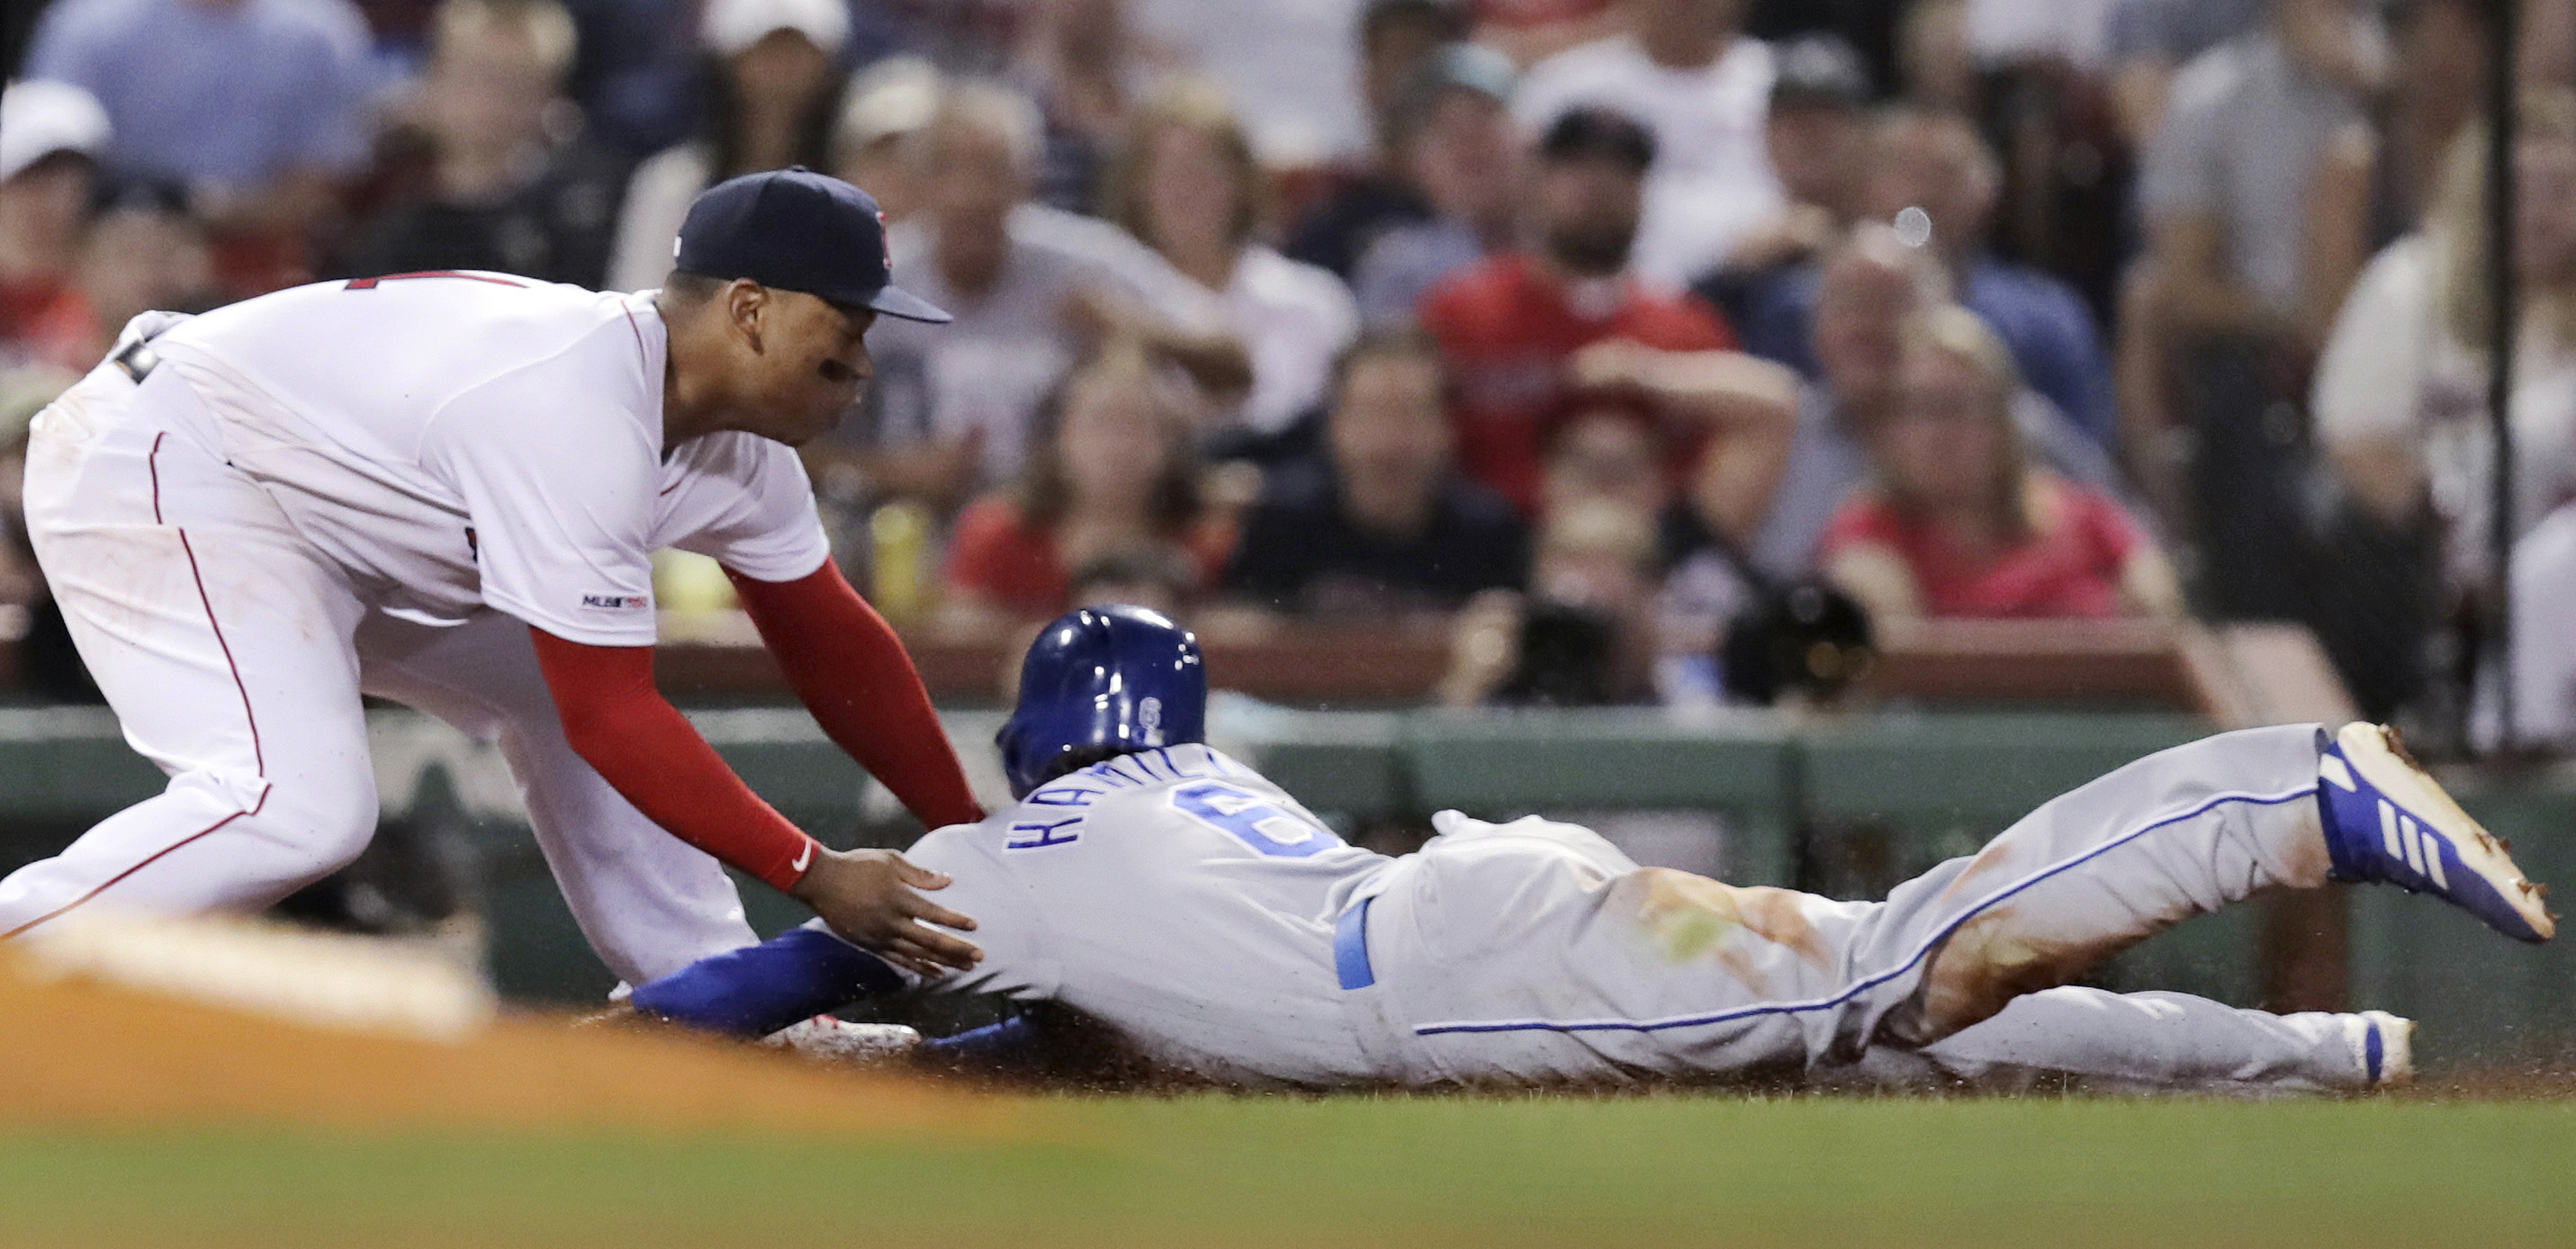 Royals speedy Hamilton has back-to-back plays overturned